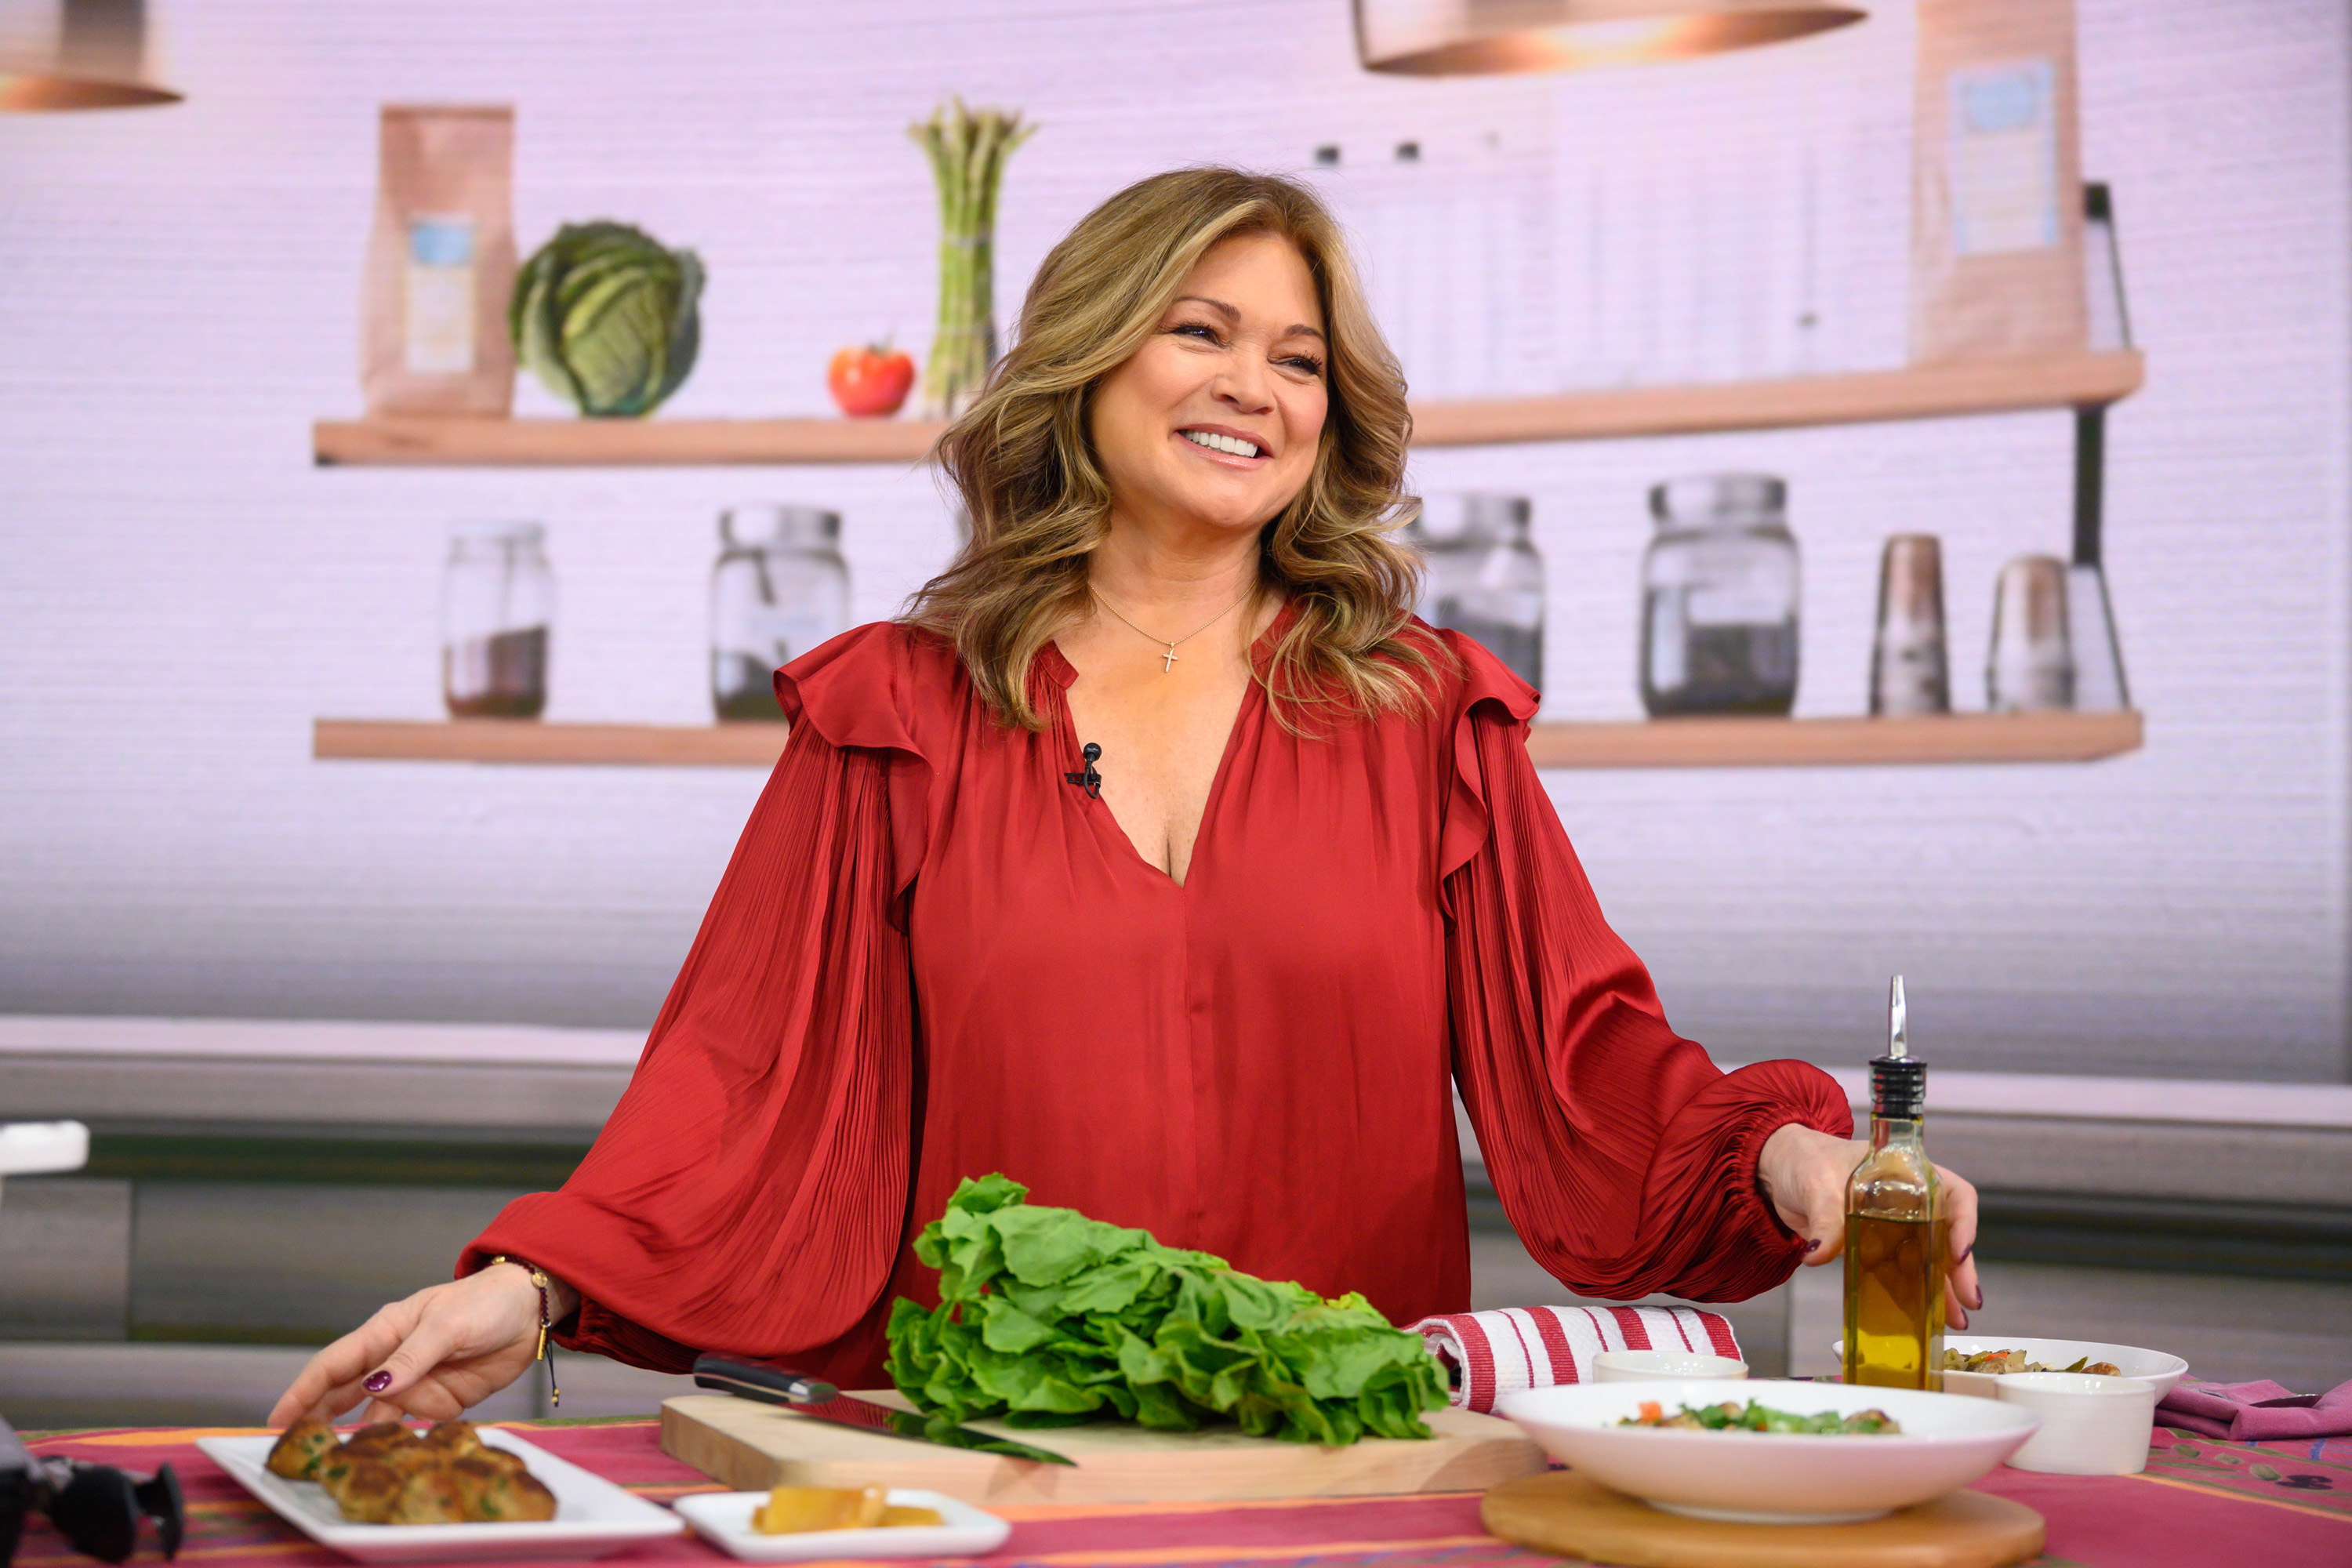 Valerie Bertinelli bei "Today" am 7. Januar 2020. | Quelle: Getty Images